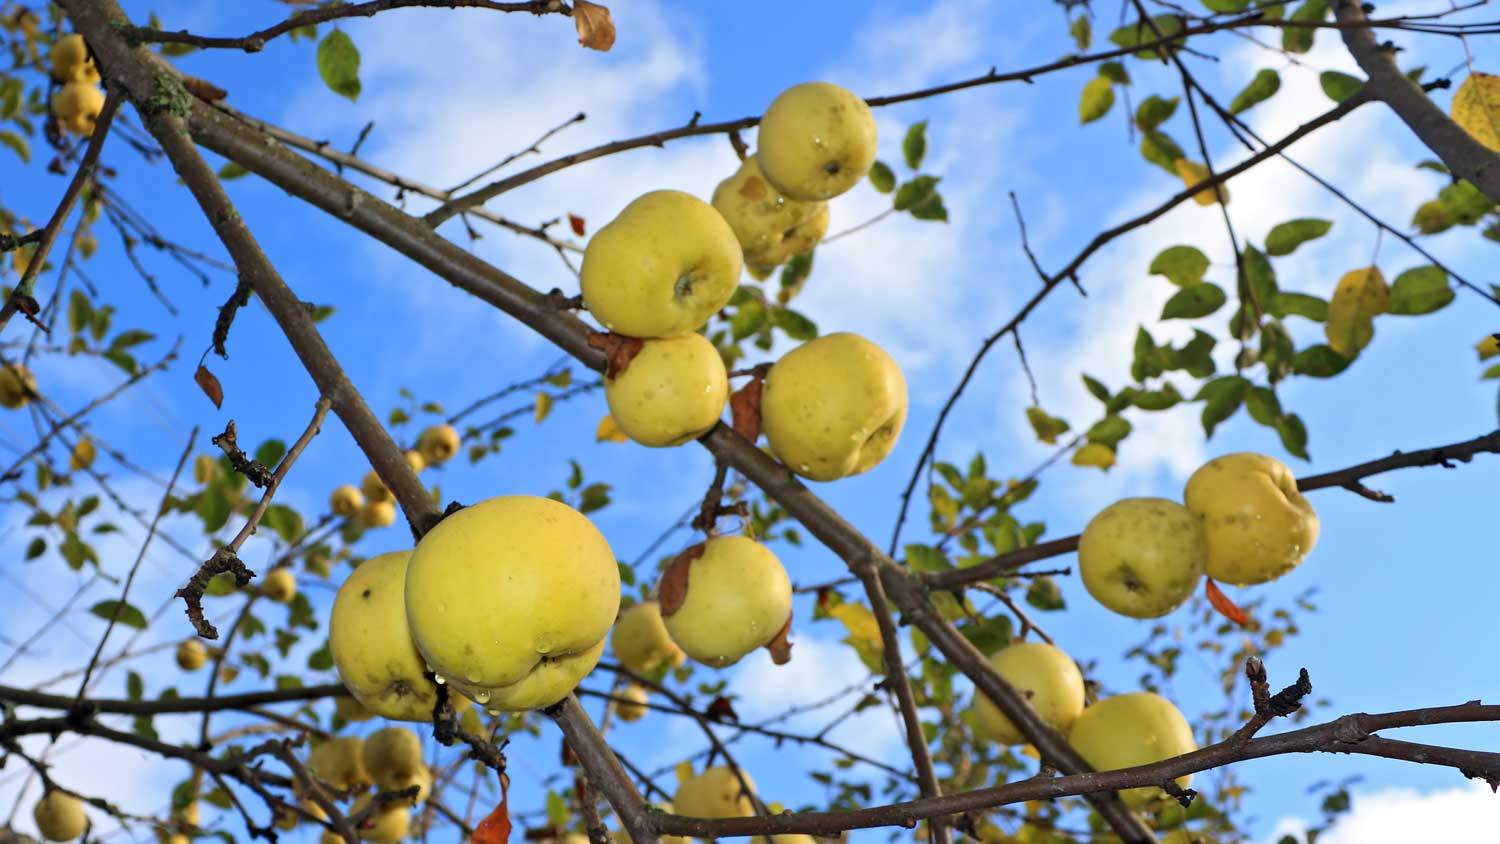 View of yellow-green apples in a tree.